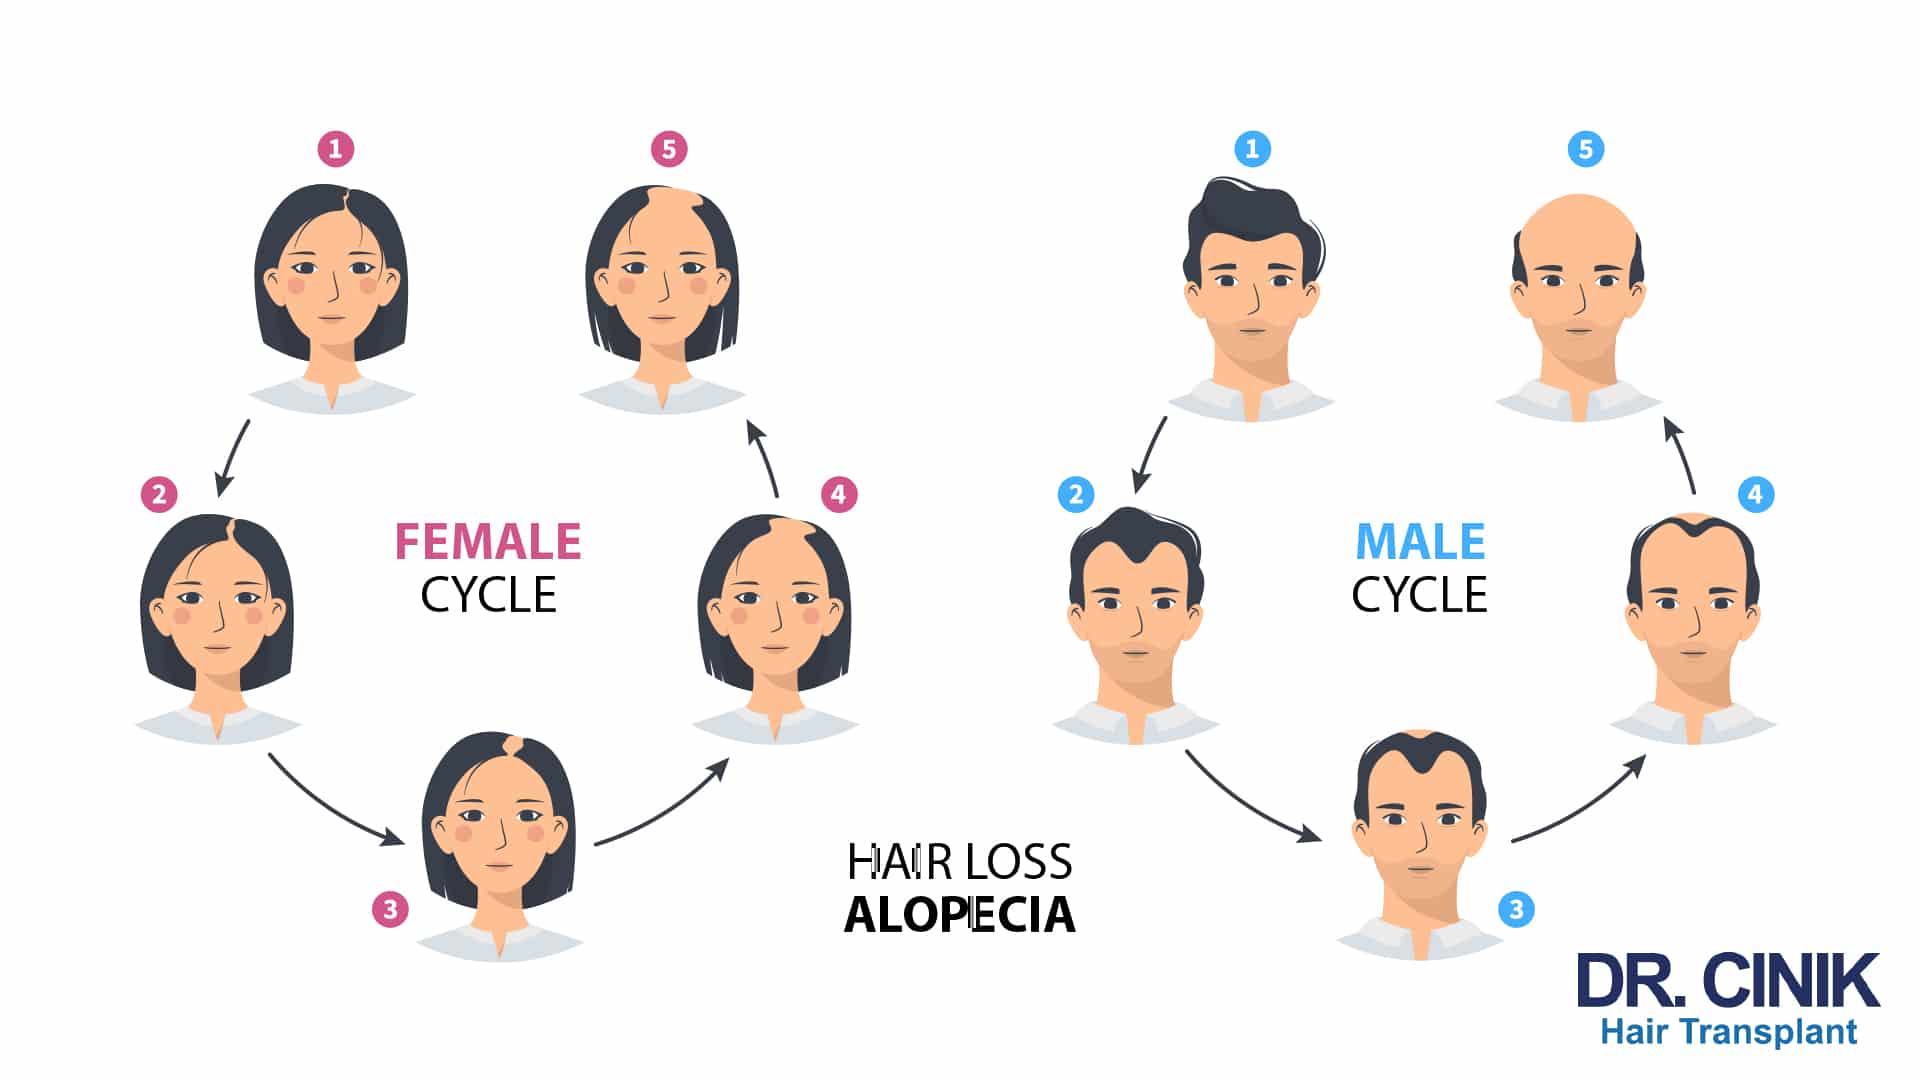 Illustration of the progression of androgenetic alopecia in men and women.